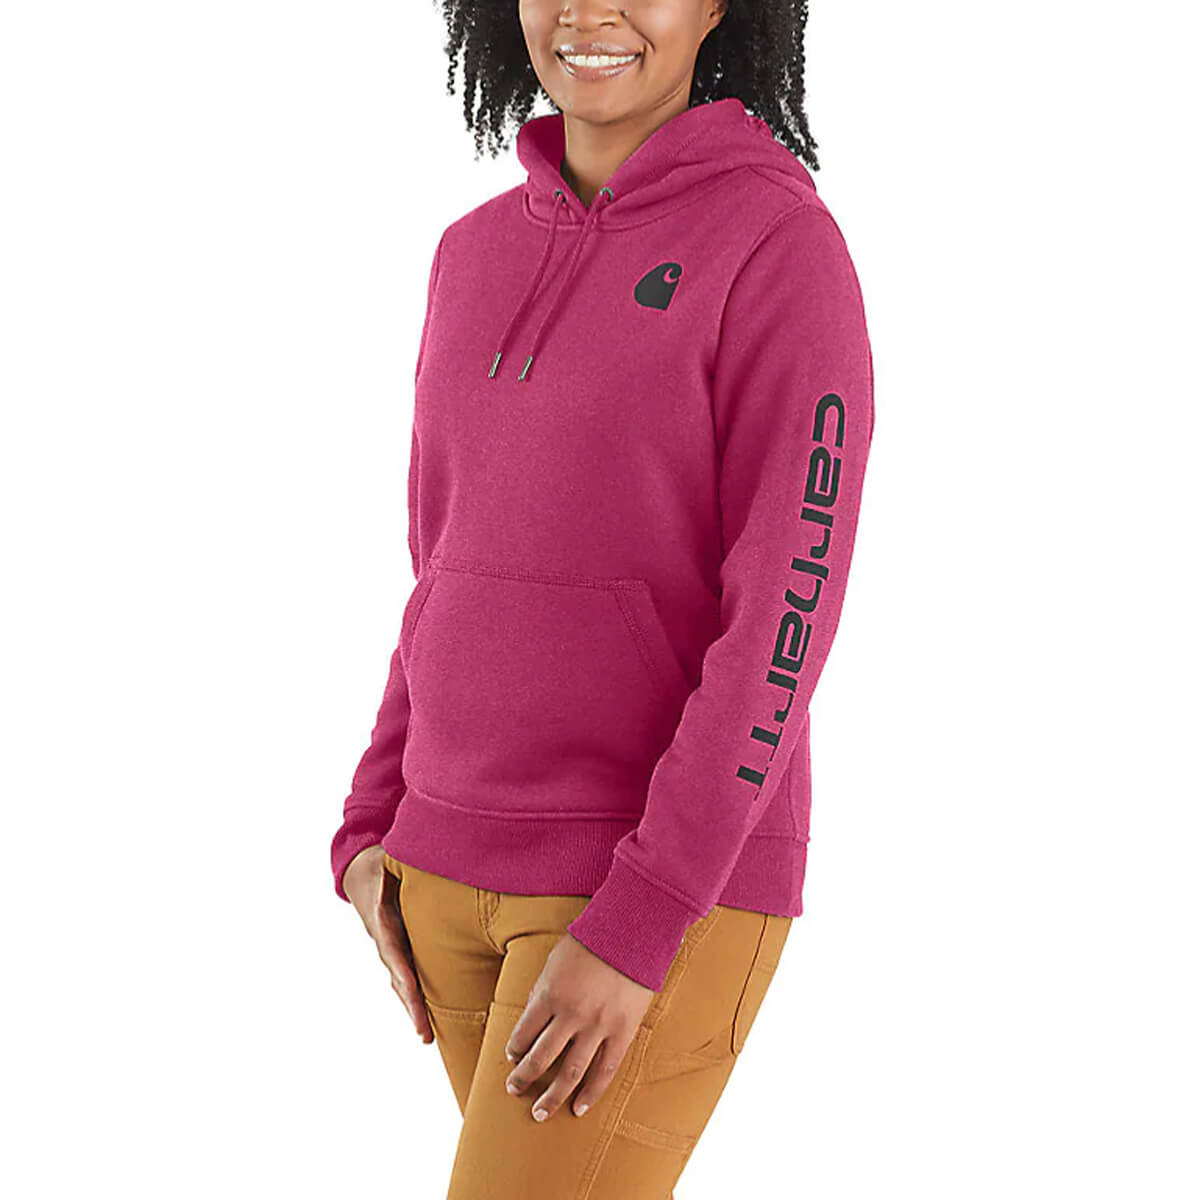 Women's Relaxed Fit Midweight Graphic Sweatshirt - Beet Red